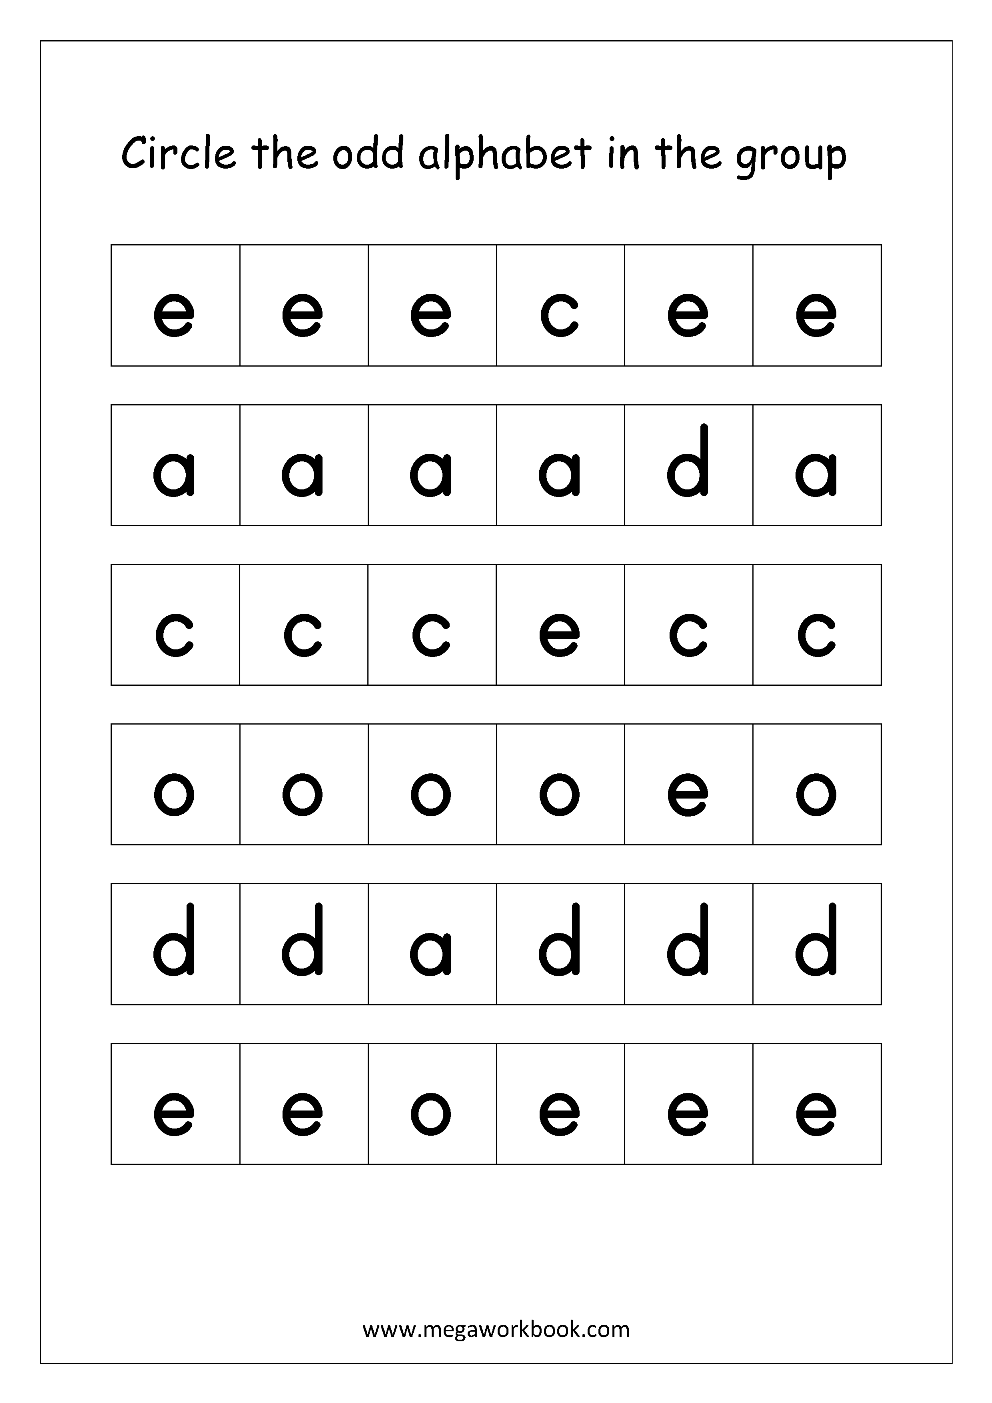 Free English Worksheets - Confusing Alphabets - MegaWorkbook Intended For B And D Confusion Worksheet